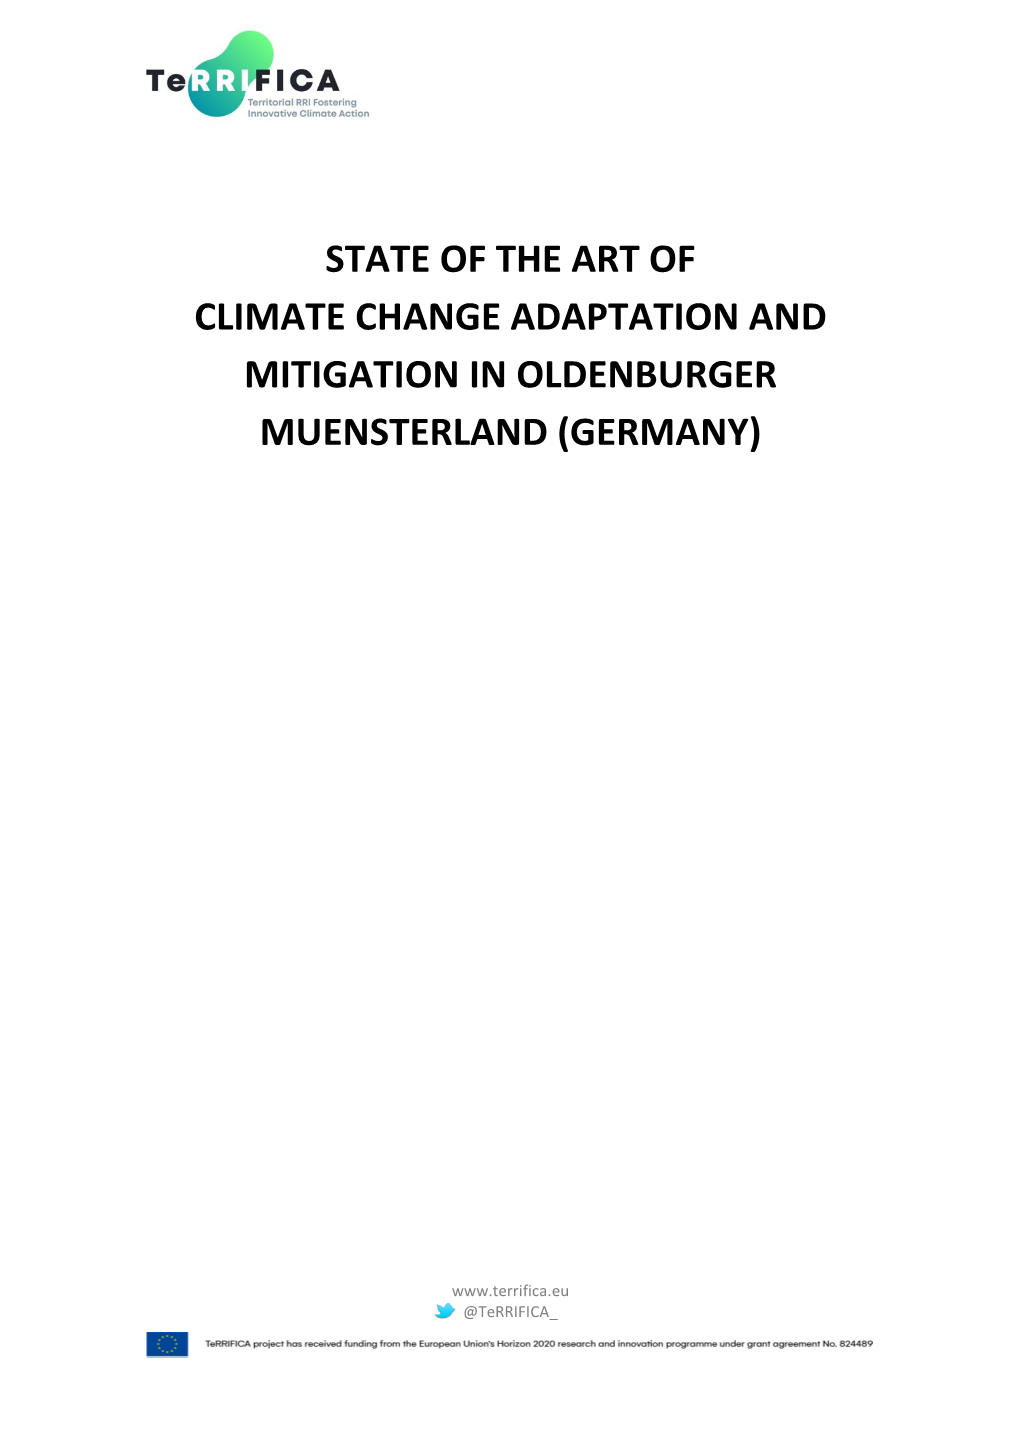 State of the Art of Climate Change Adaptation and Mitigation in Oldenburger Muensterland (Germany)